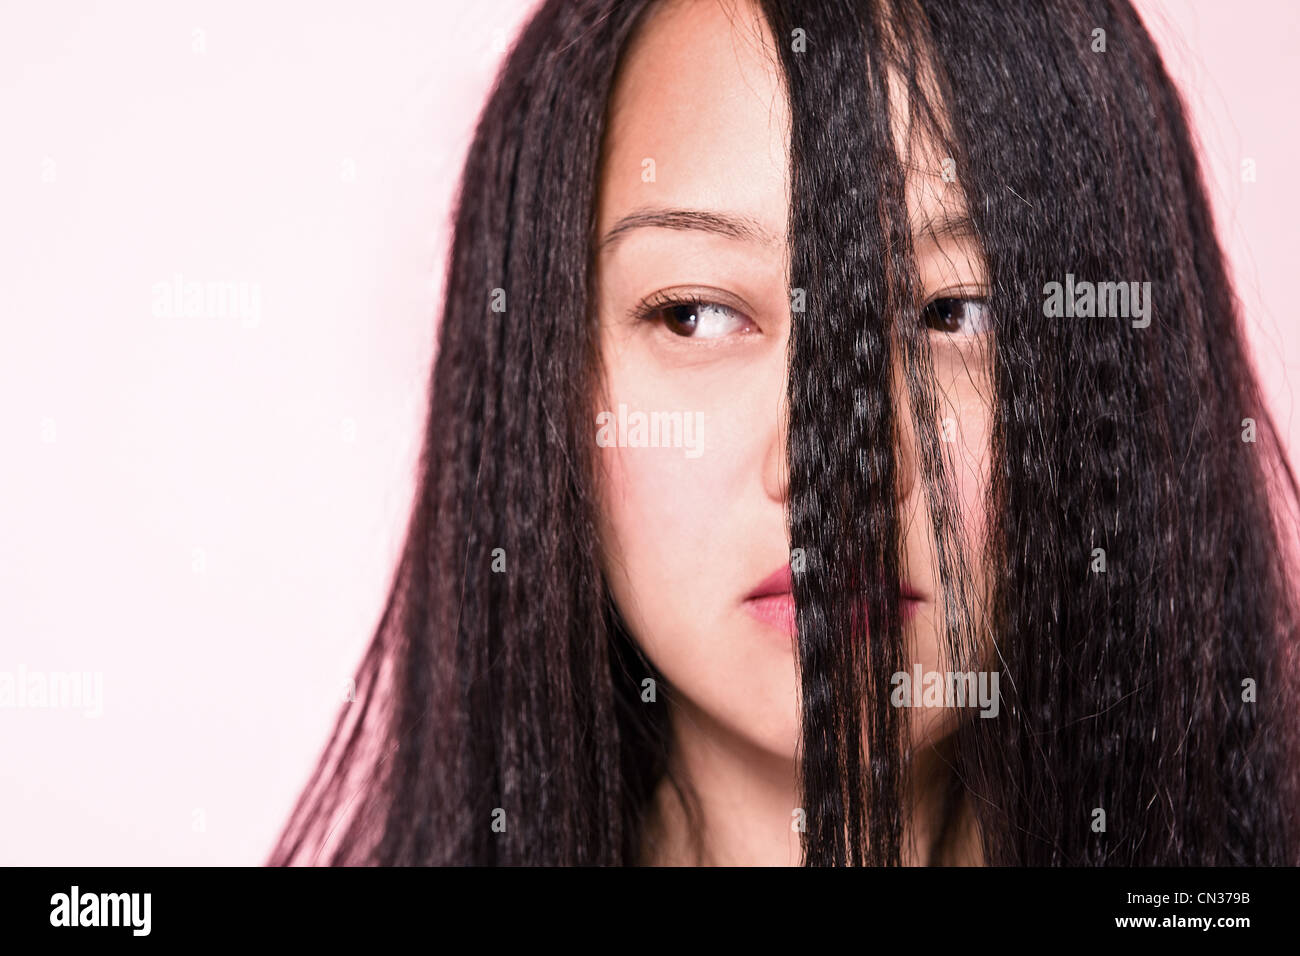 Woman with crimped hair covering face Stock Photo